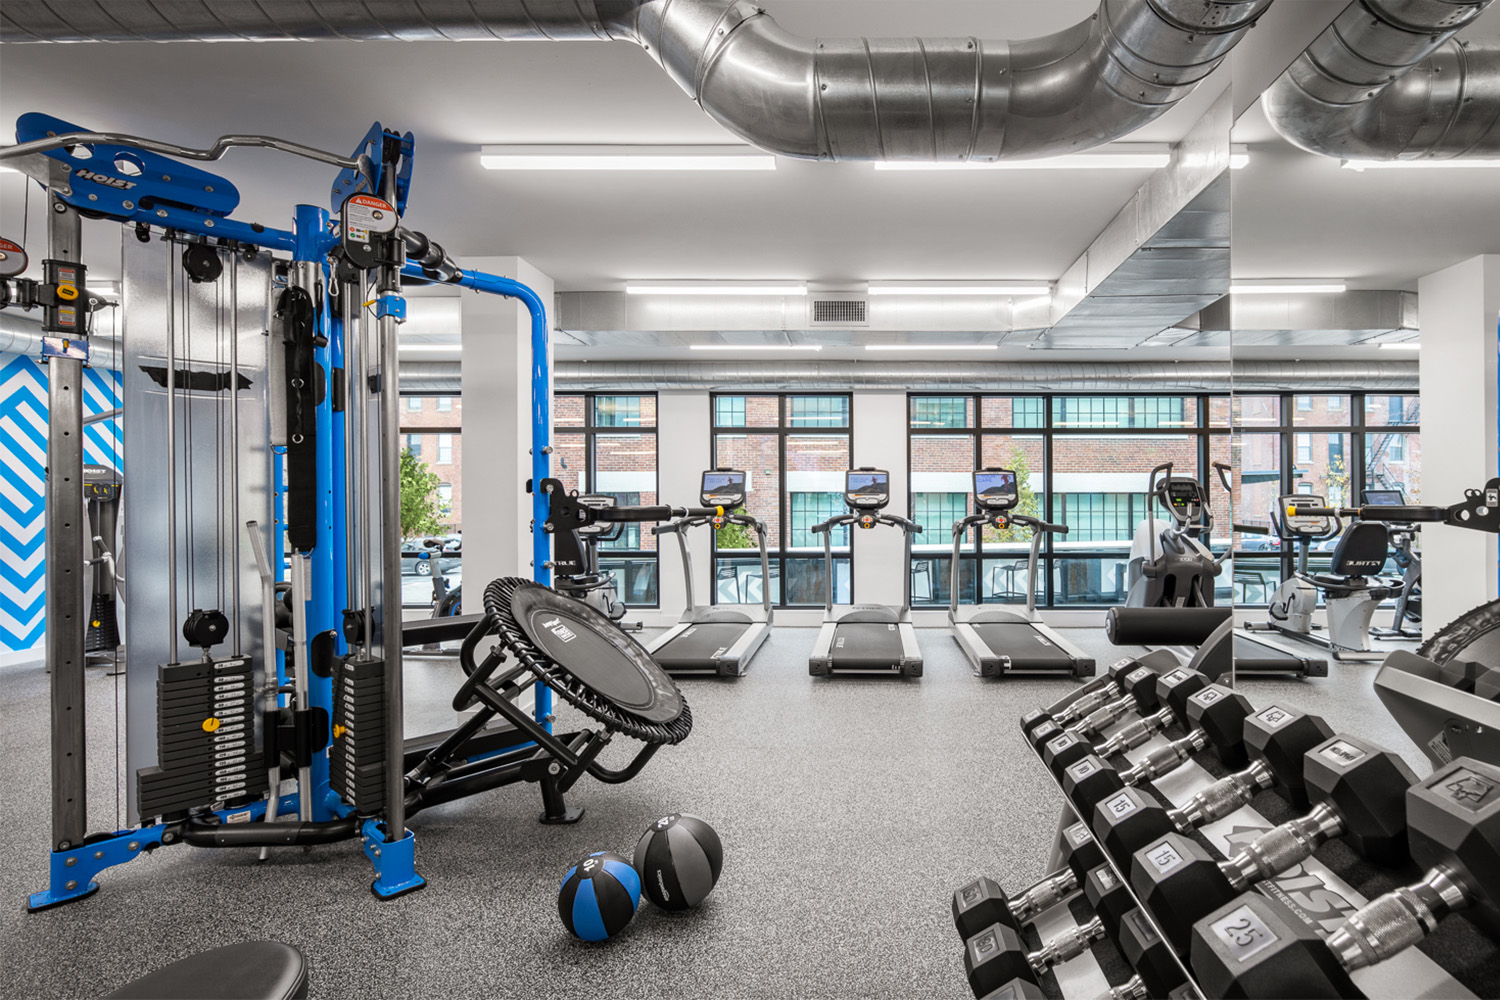 Gym eqipped with top of the line fitness equipment, and ample lighting through windows